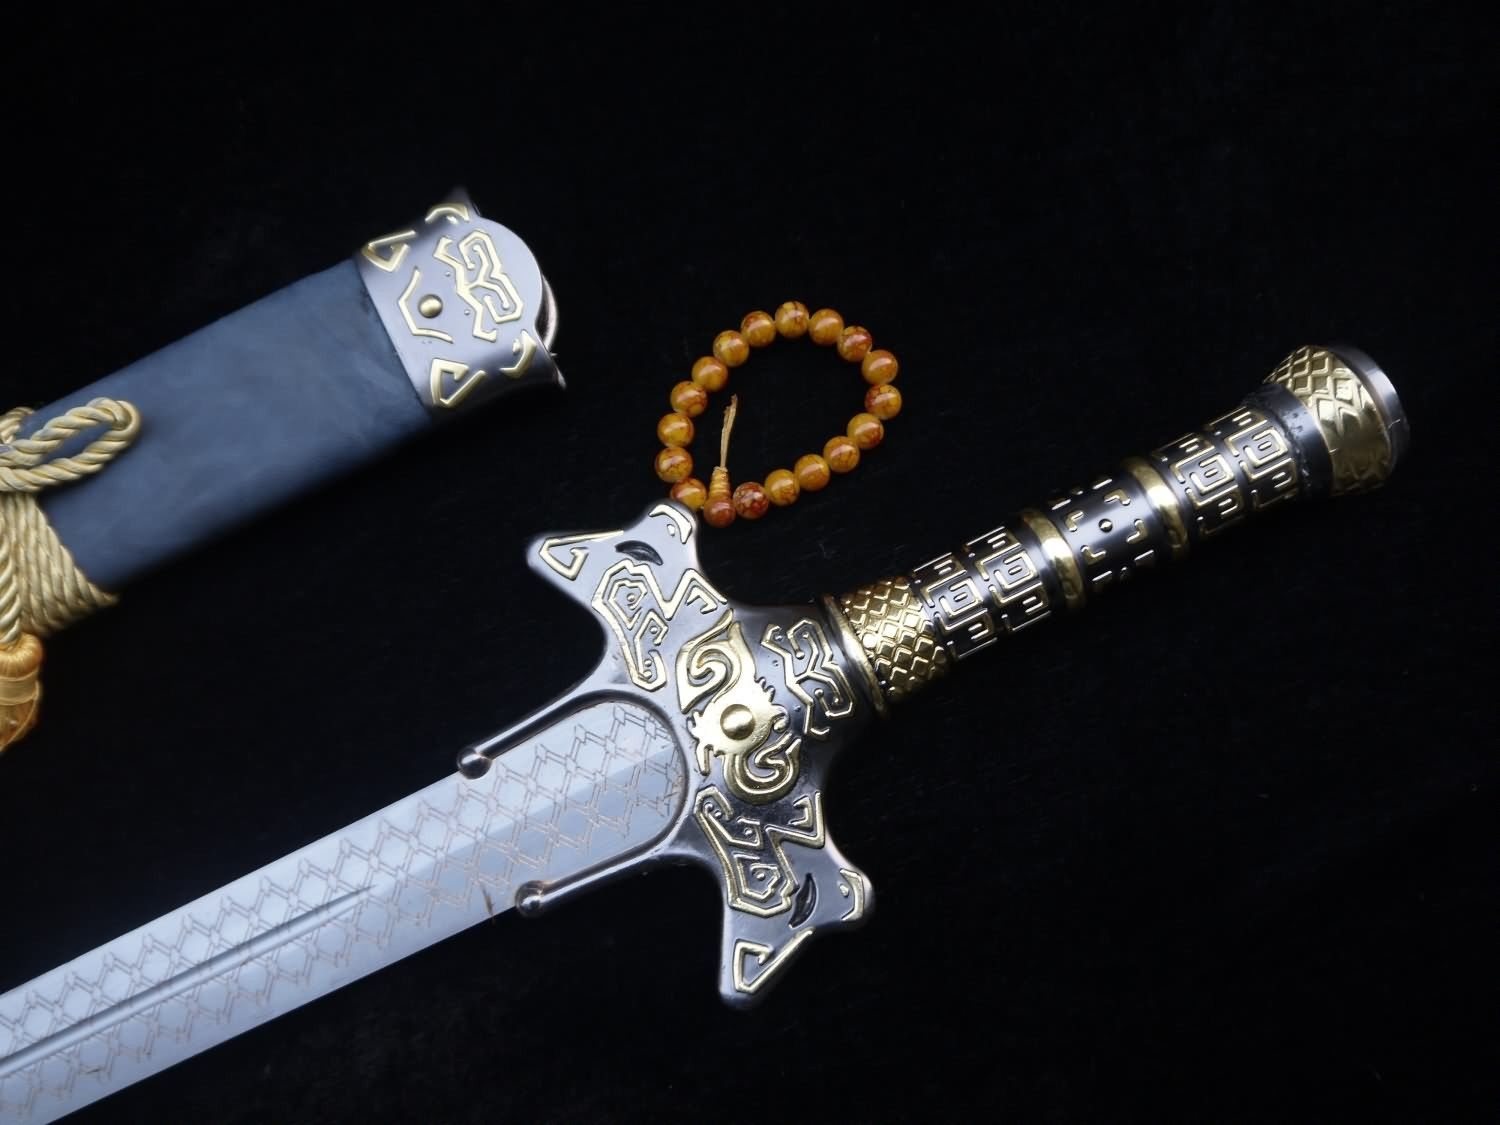 Cosplay sword,Yuanhong jian,High carbon steel blade,Alloy fittings - Chinese sword shop